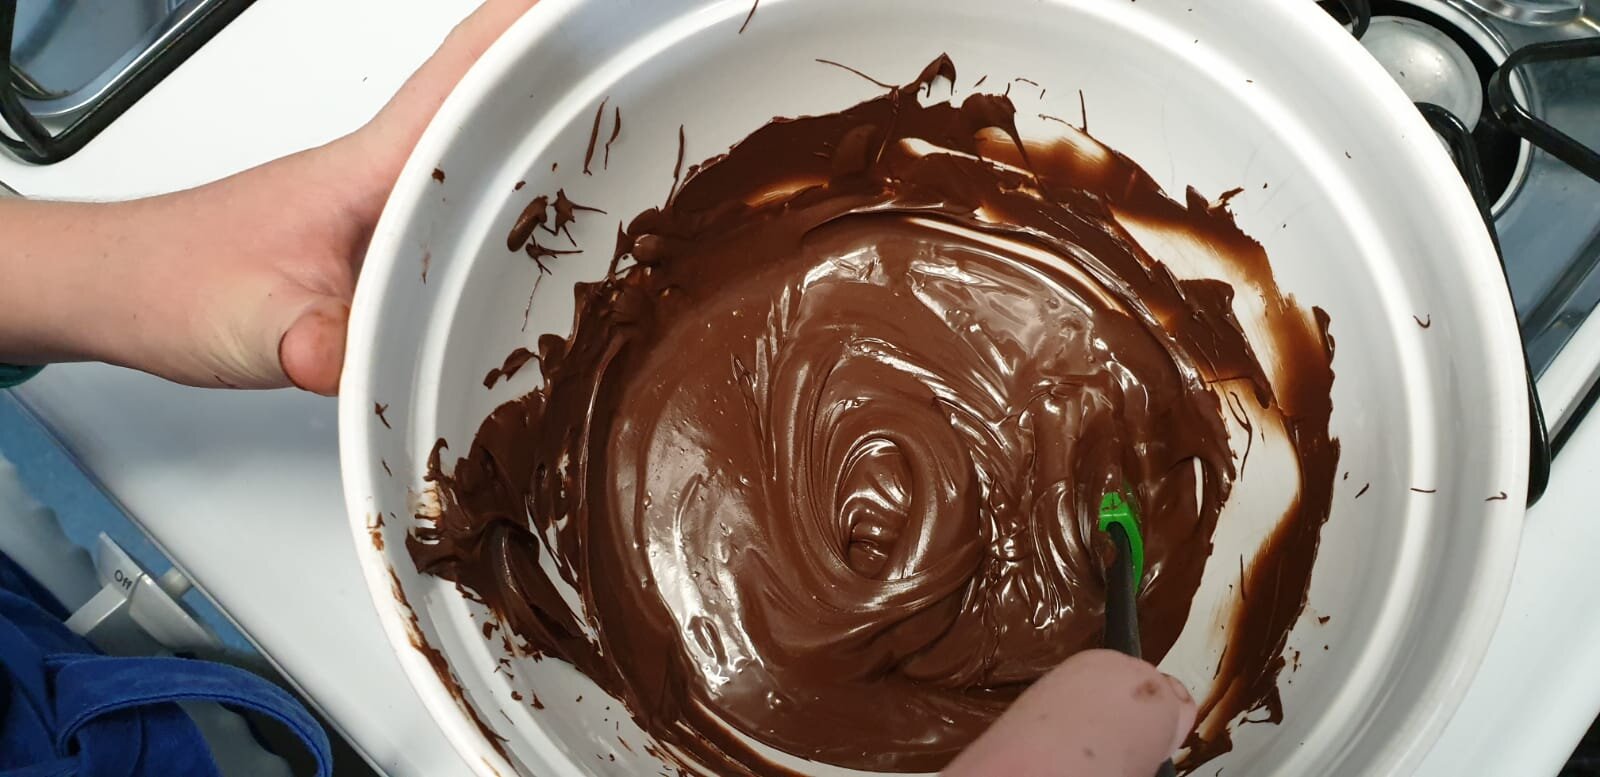 Melted chocolate.jpg